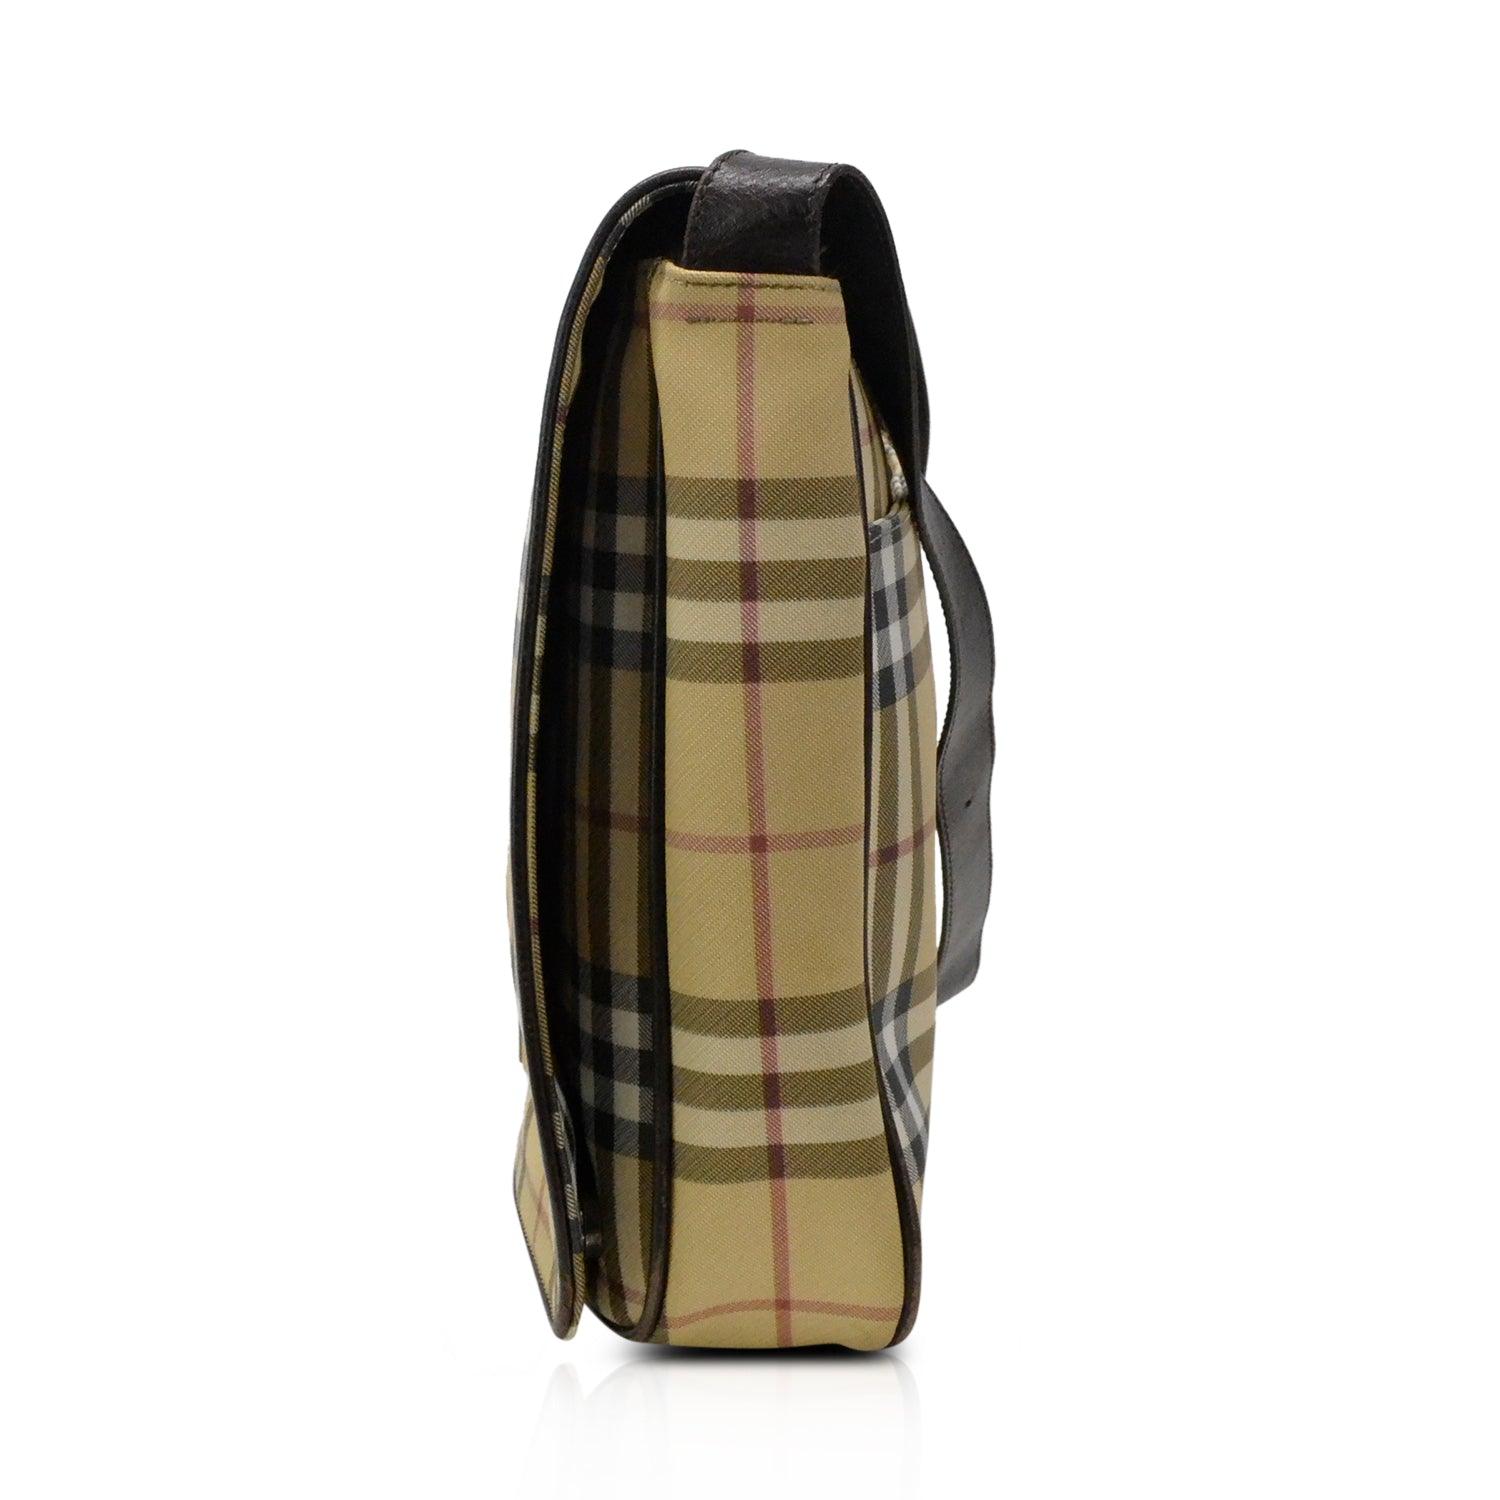 Burberry Messenger Bag - Fashionably Yours